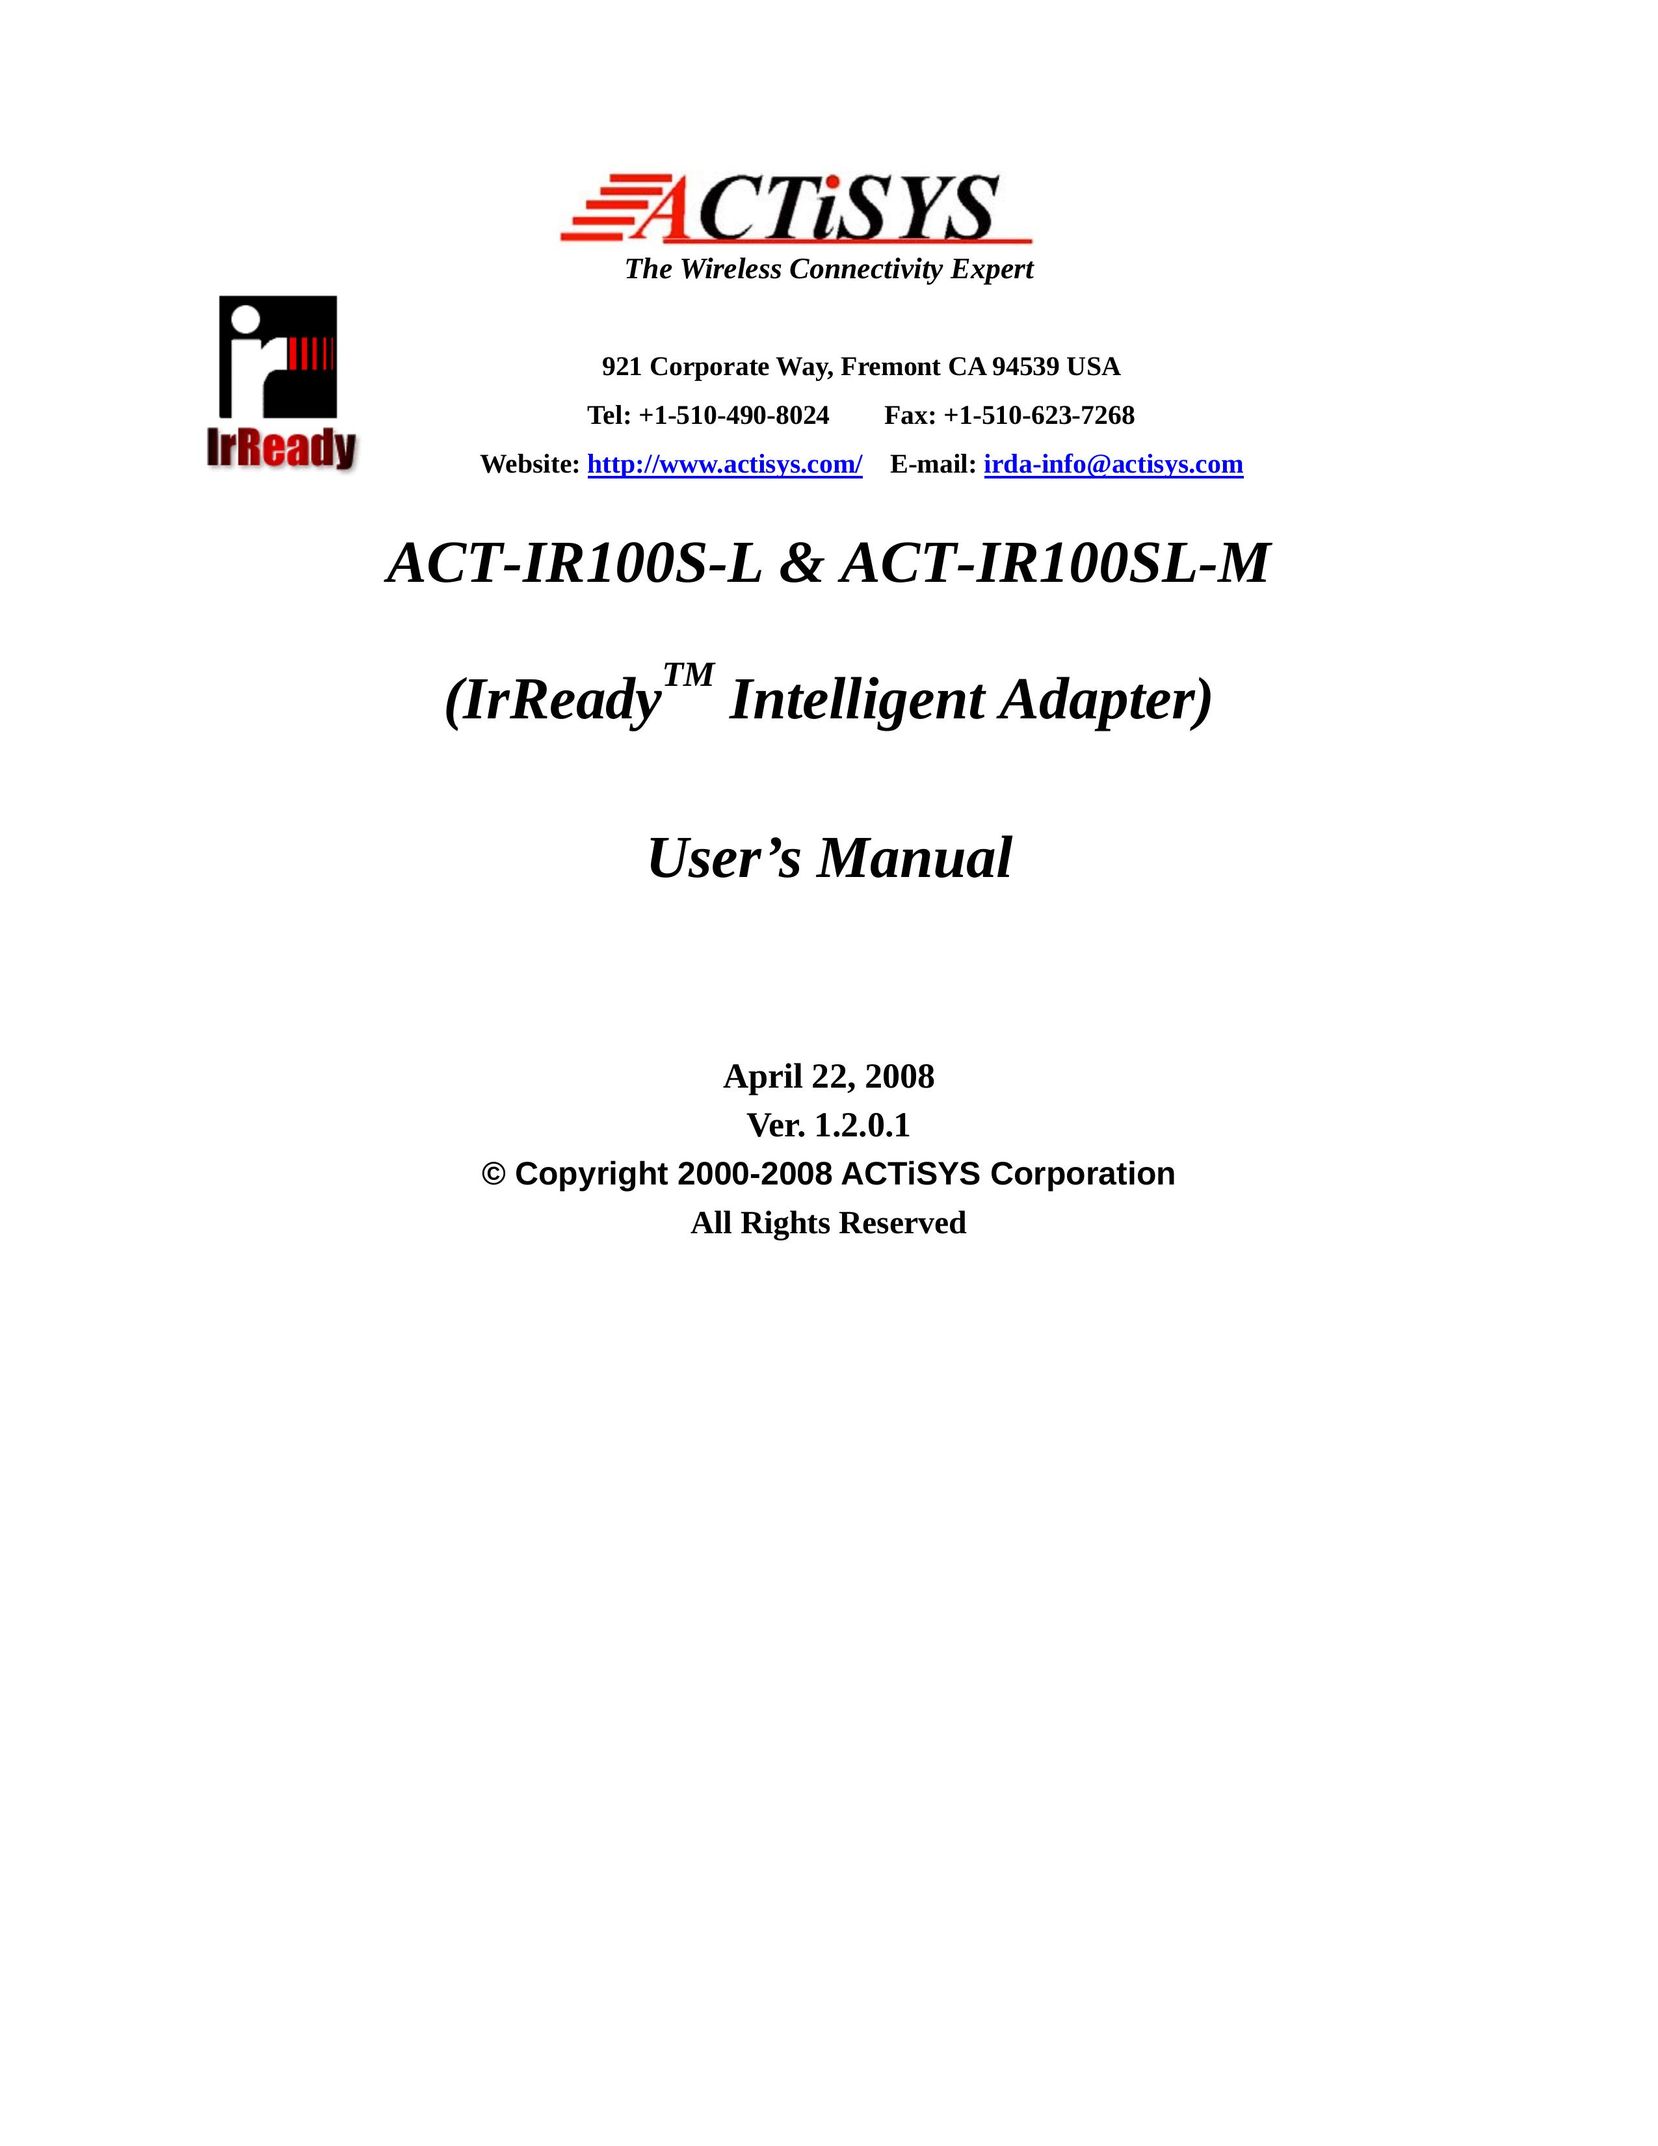 ACTiSYS ACT-IR100S-L Network Card User Manual